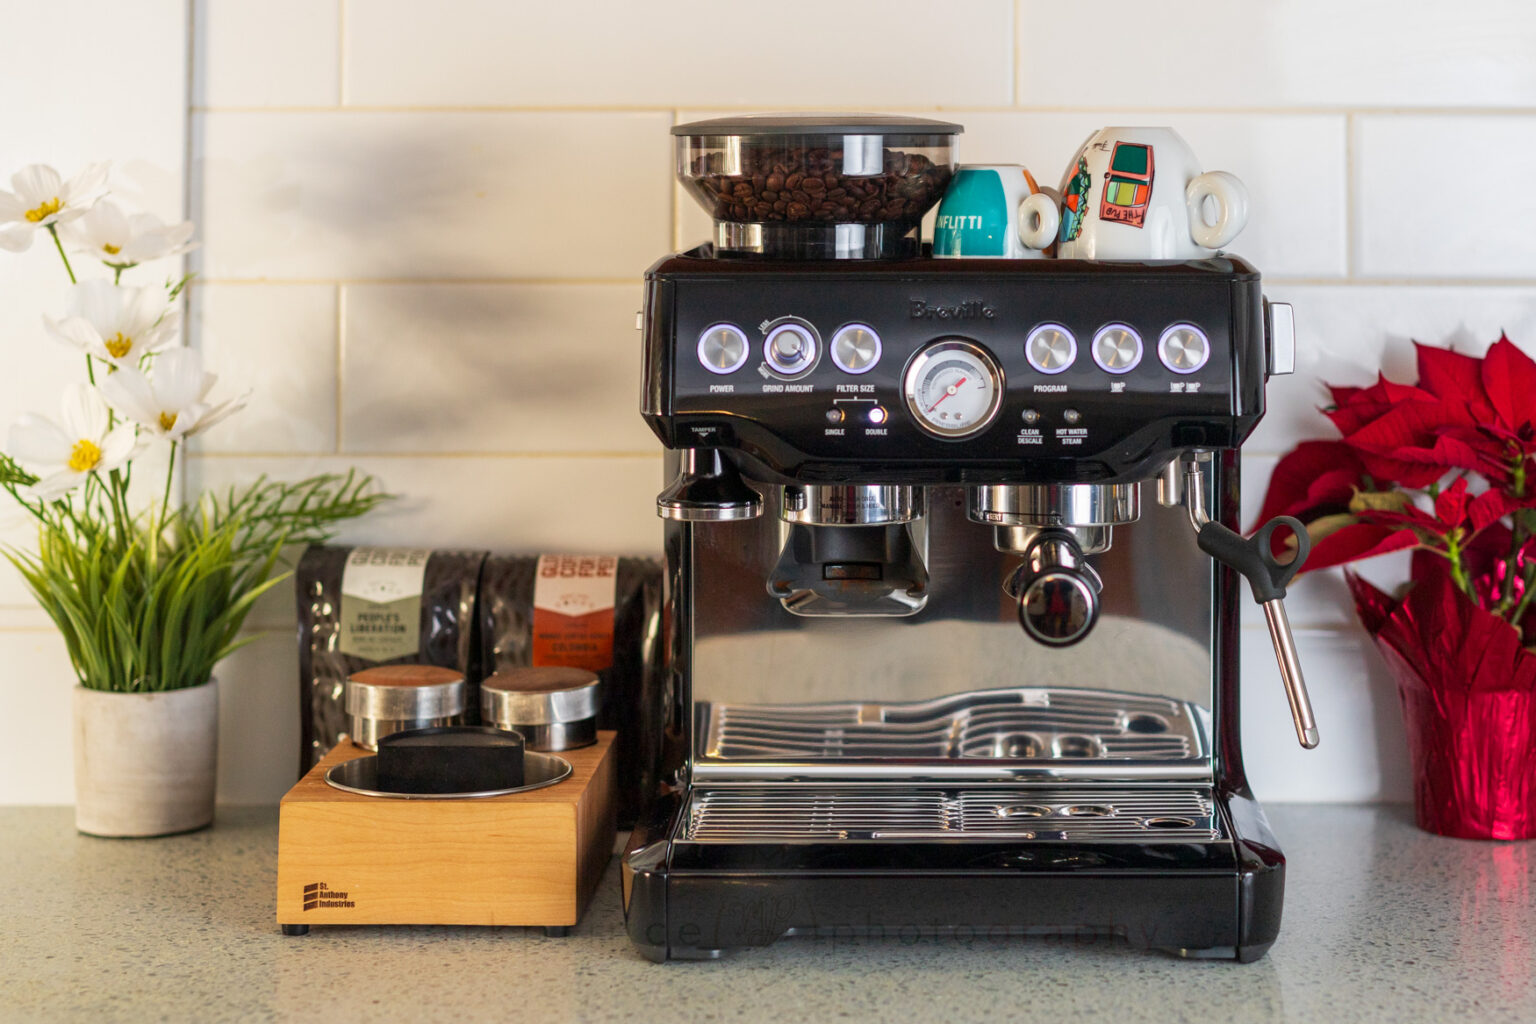 The Barista Express from Breville doesn't take up a lot of counter space, but provides both the grinder and espresso machine, as well as a hot water source.